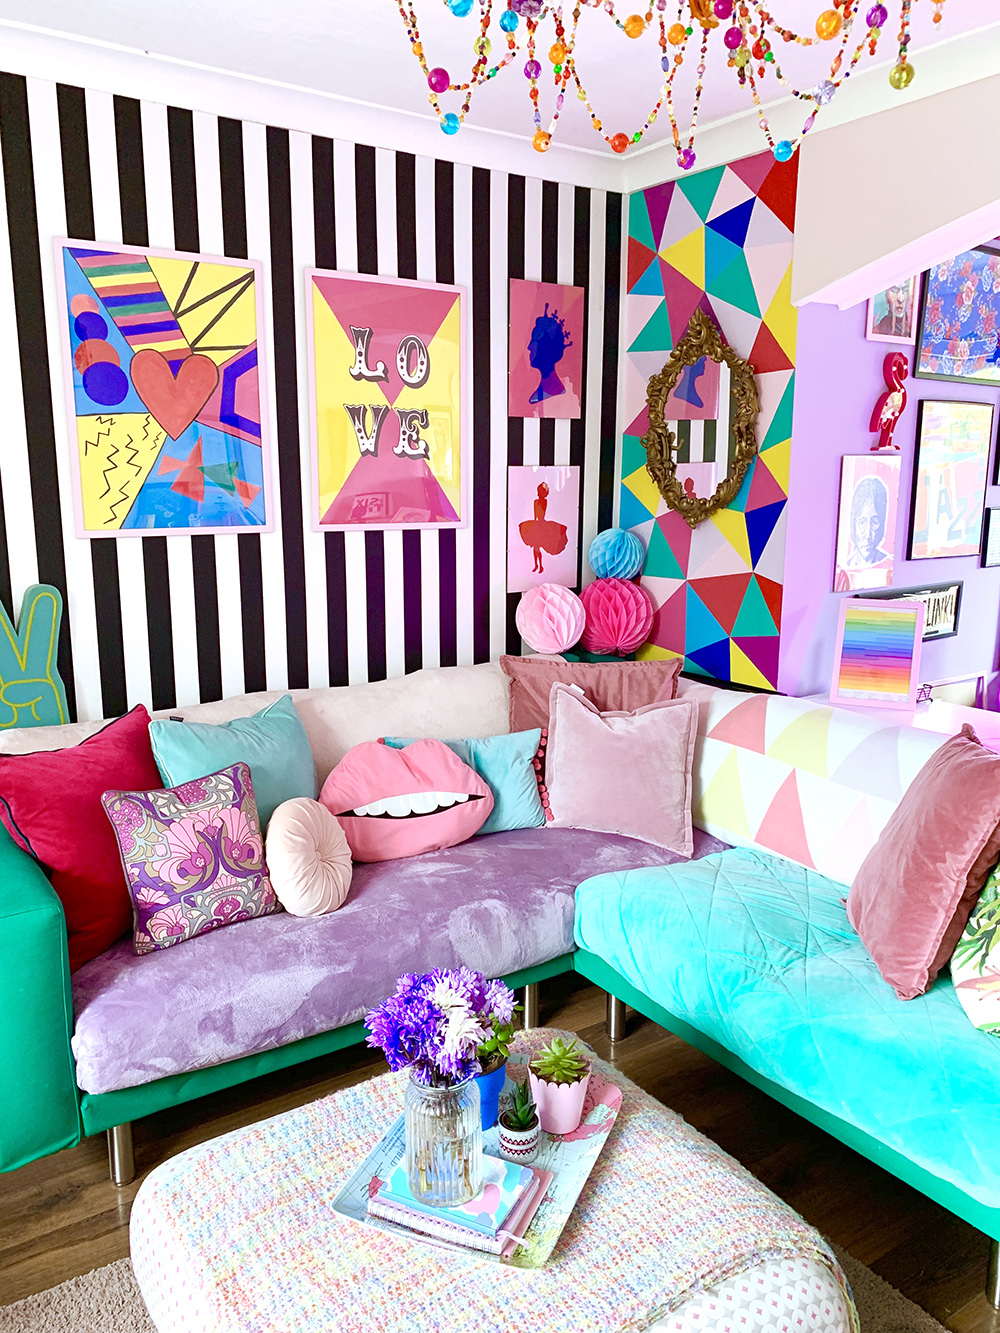 Crazy & colourful living room decor with monochrome stripy wallpaper and quirky colour pops.